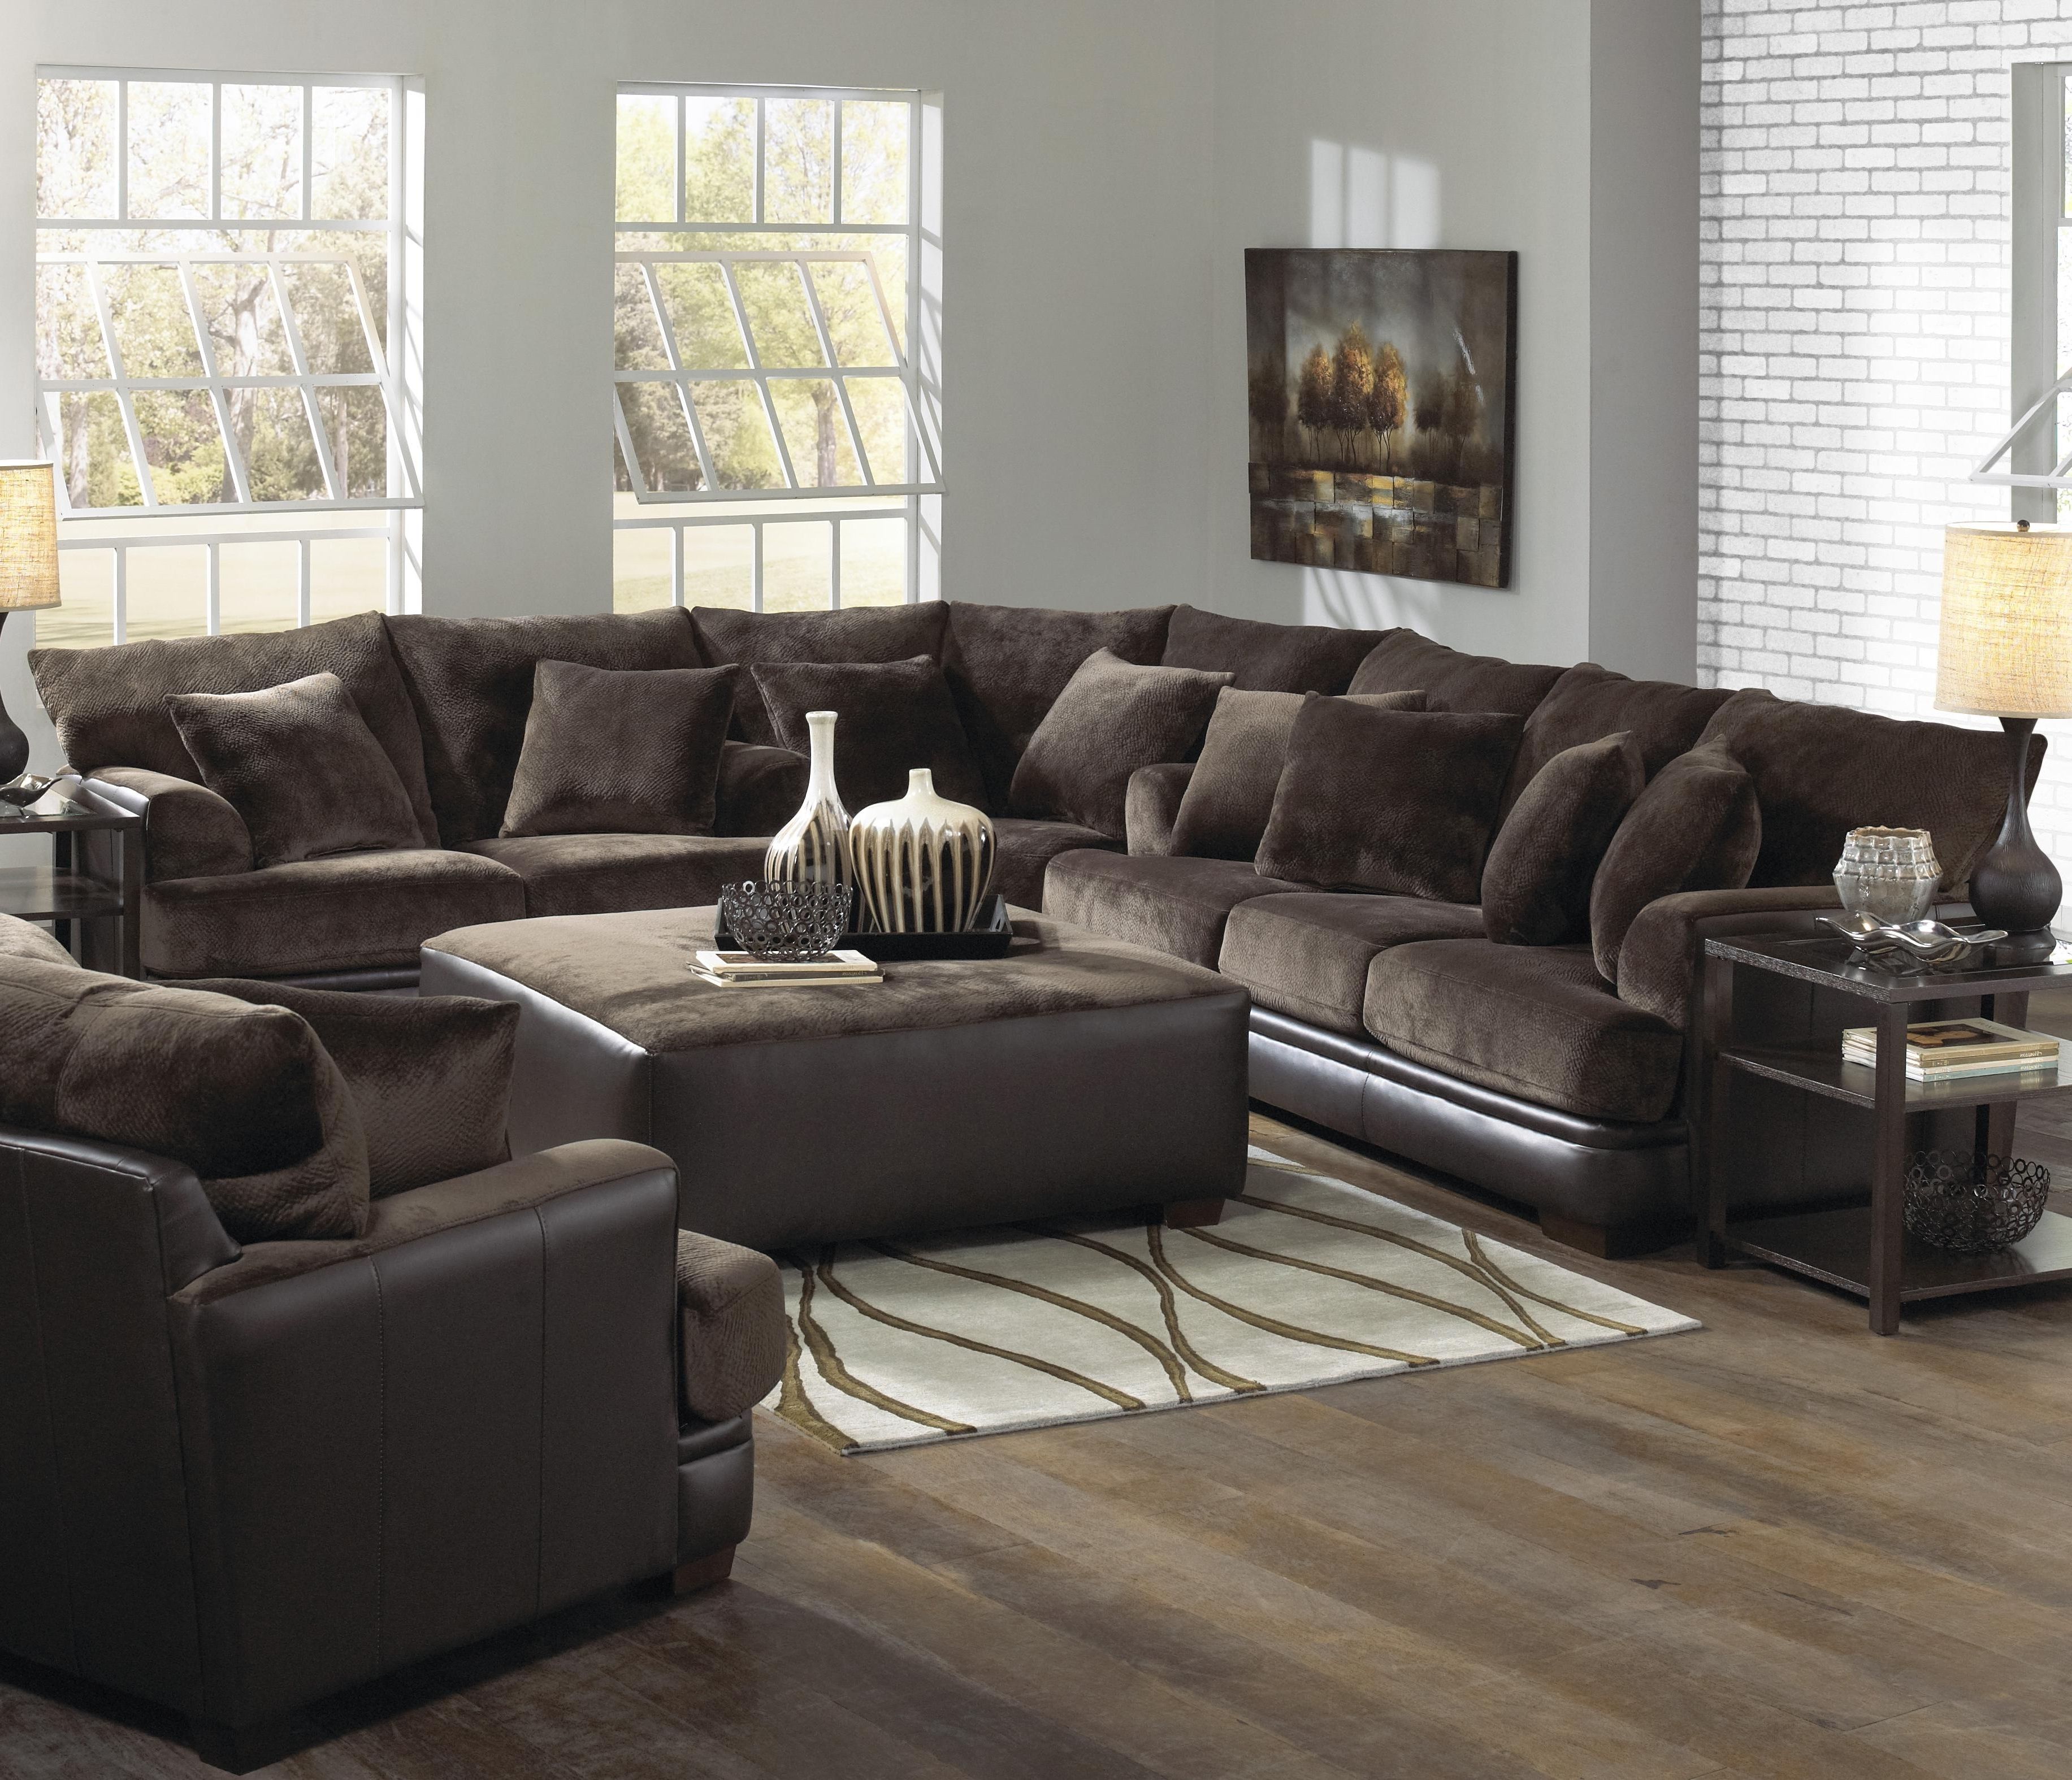 Big Sofas Wide Seat Sectional Small U Shaped Sectional Top Rated For Popular Big U Shaped Sectionals (View 1 of 20)